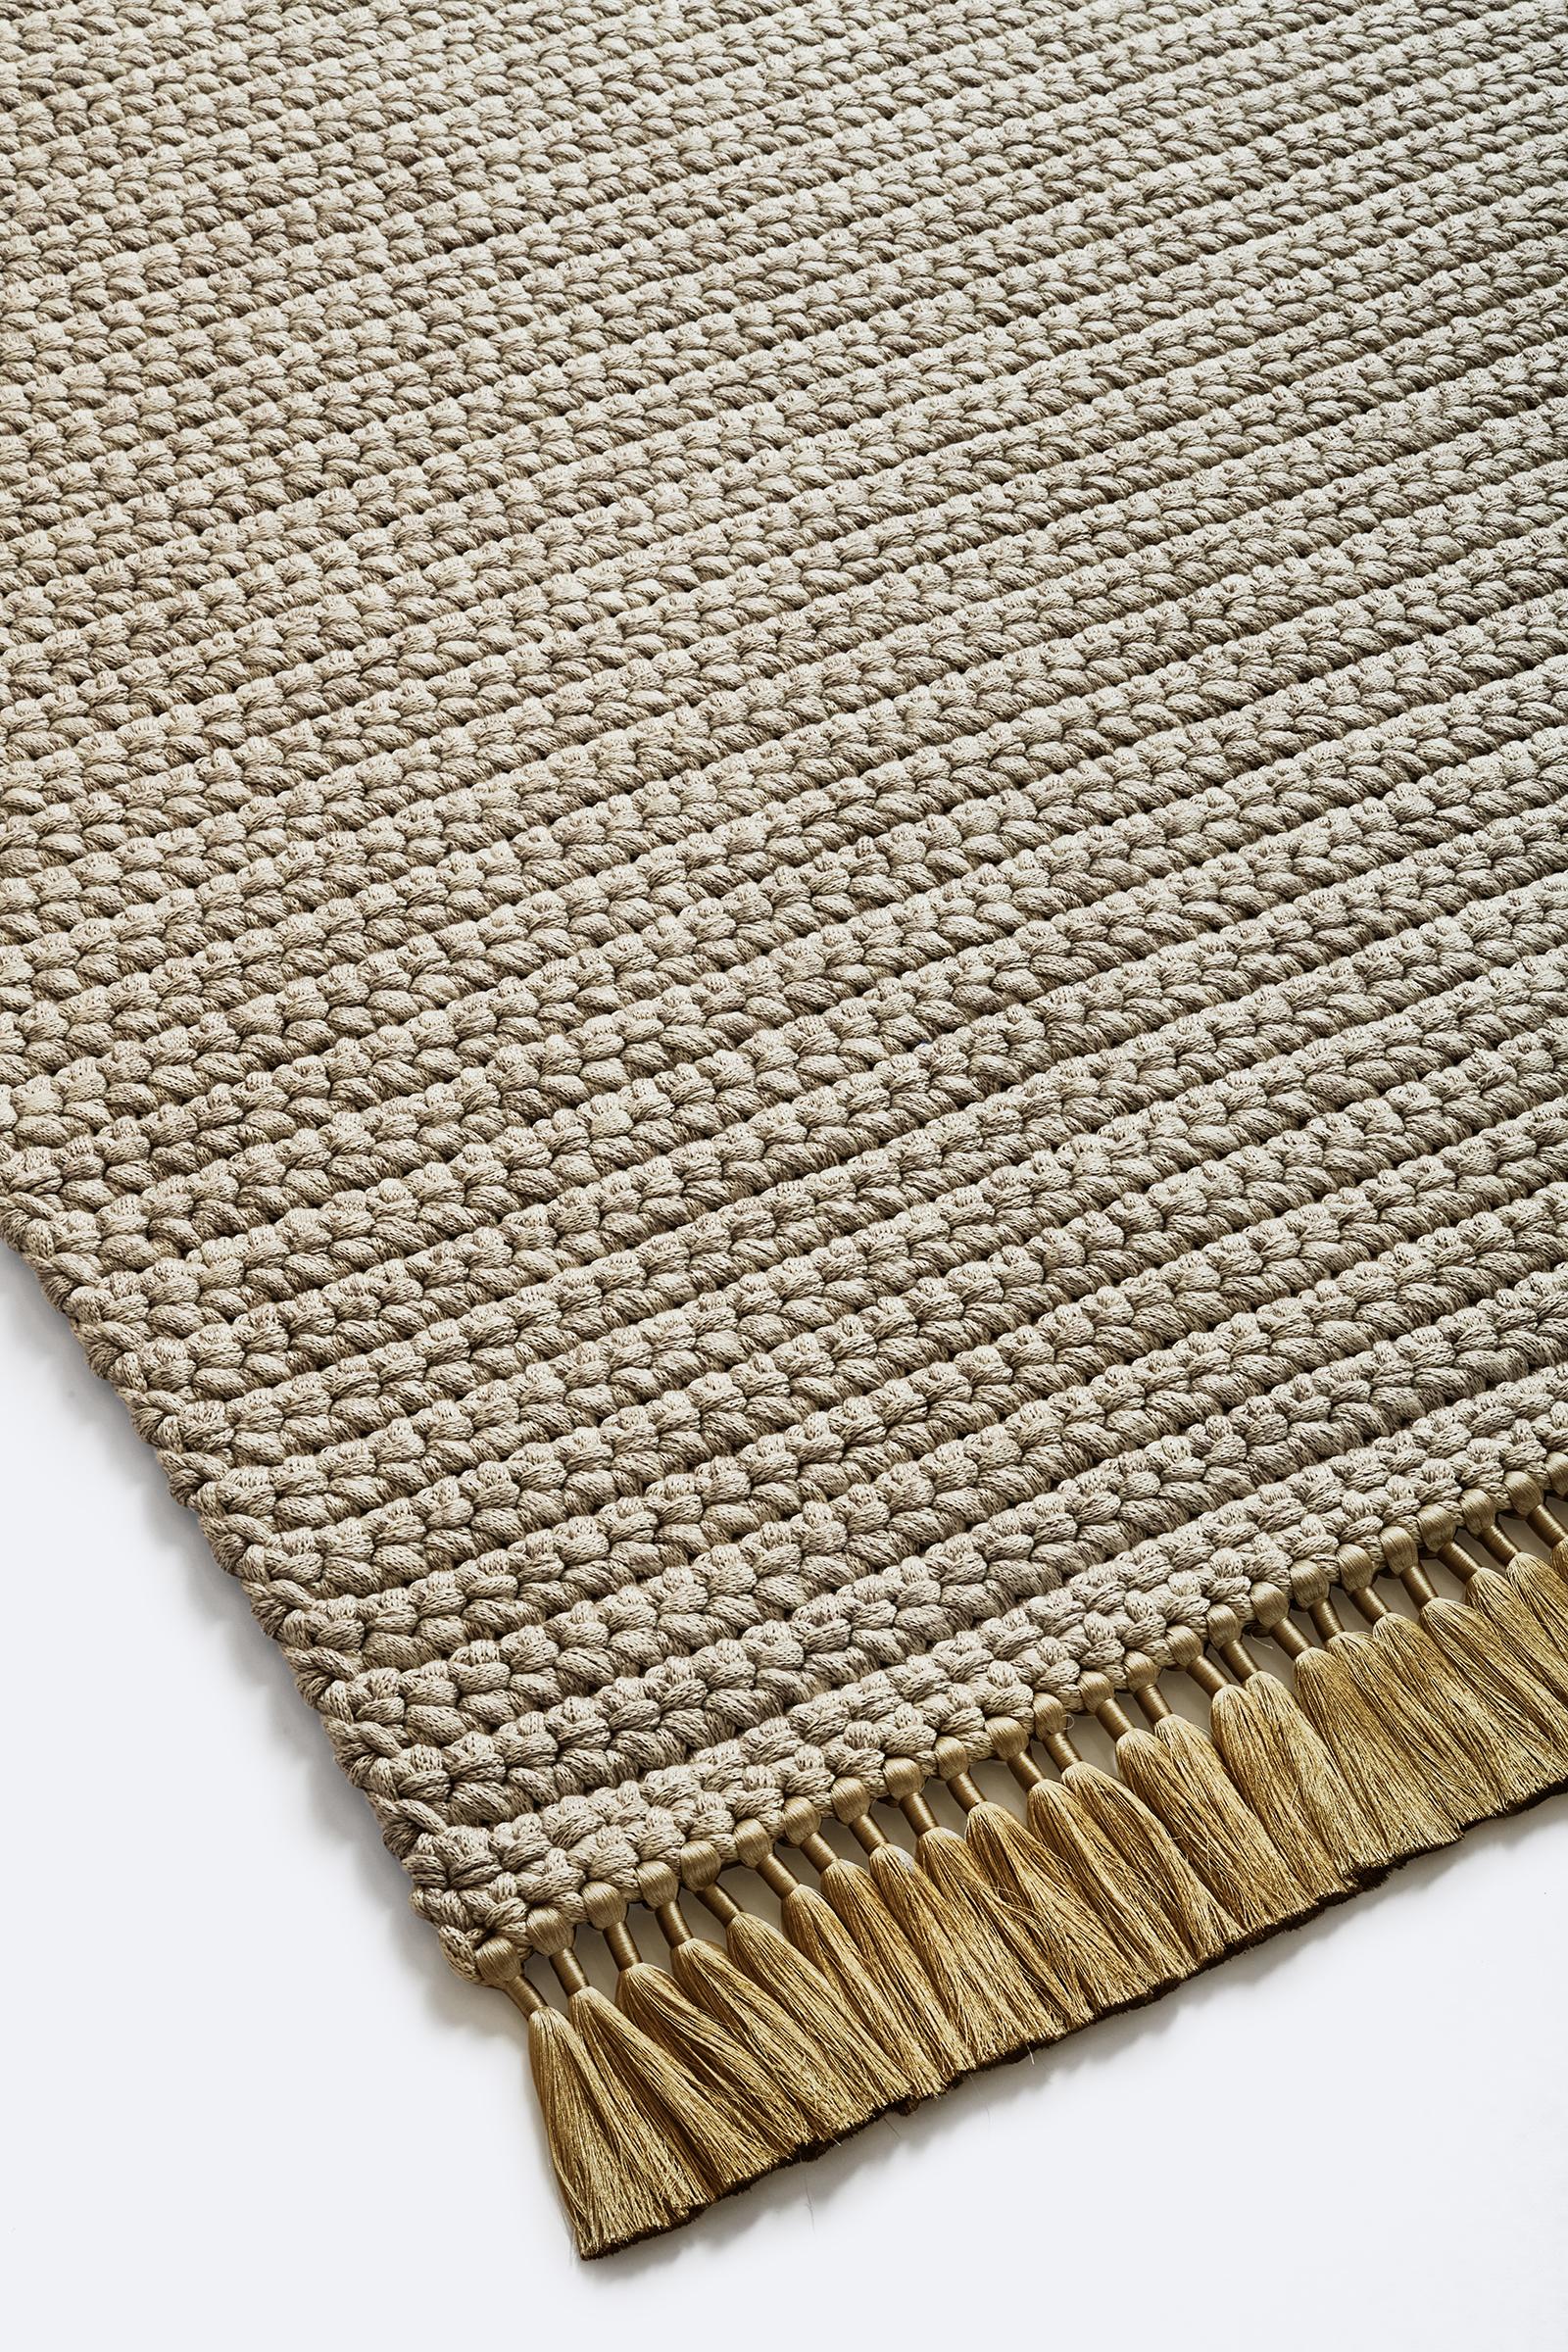 Contemporary Handmade Crochet Thick Rug 170X240 cm in Beige - Sand & Cacao Colors For Sale